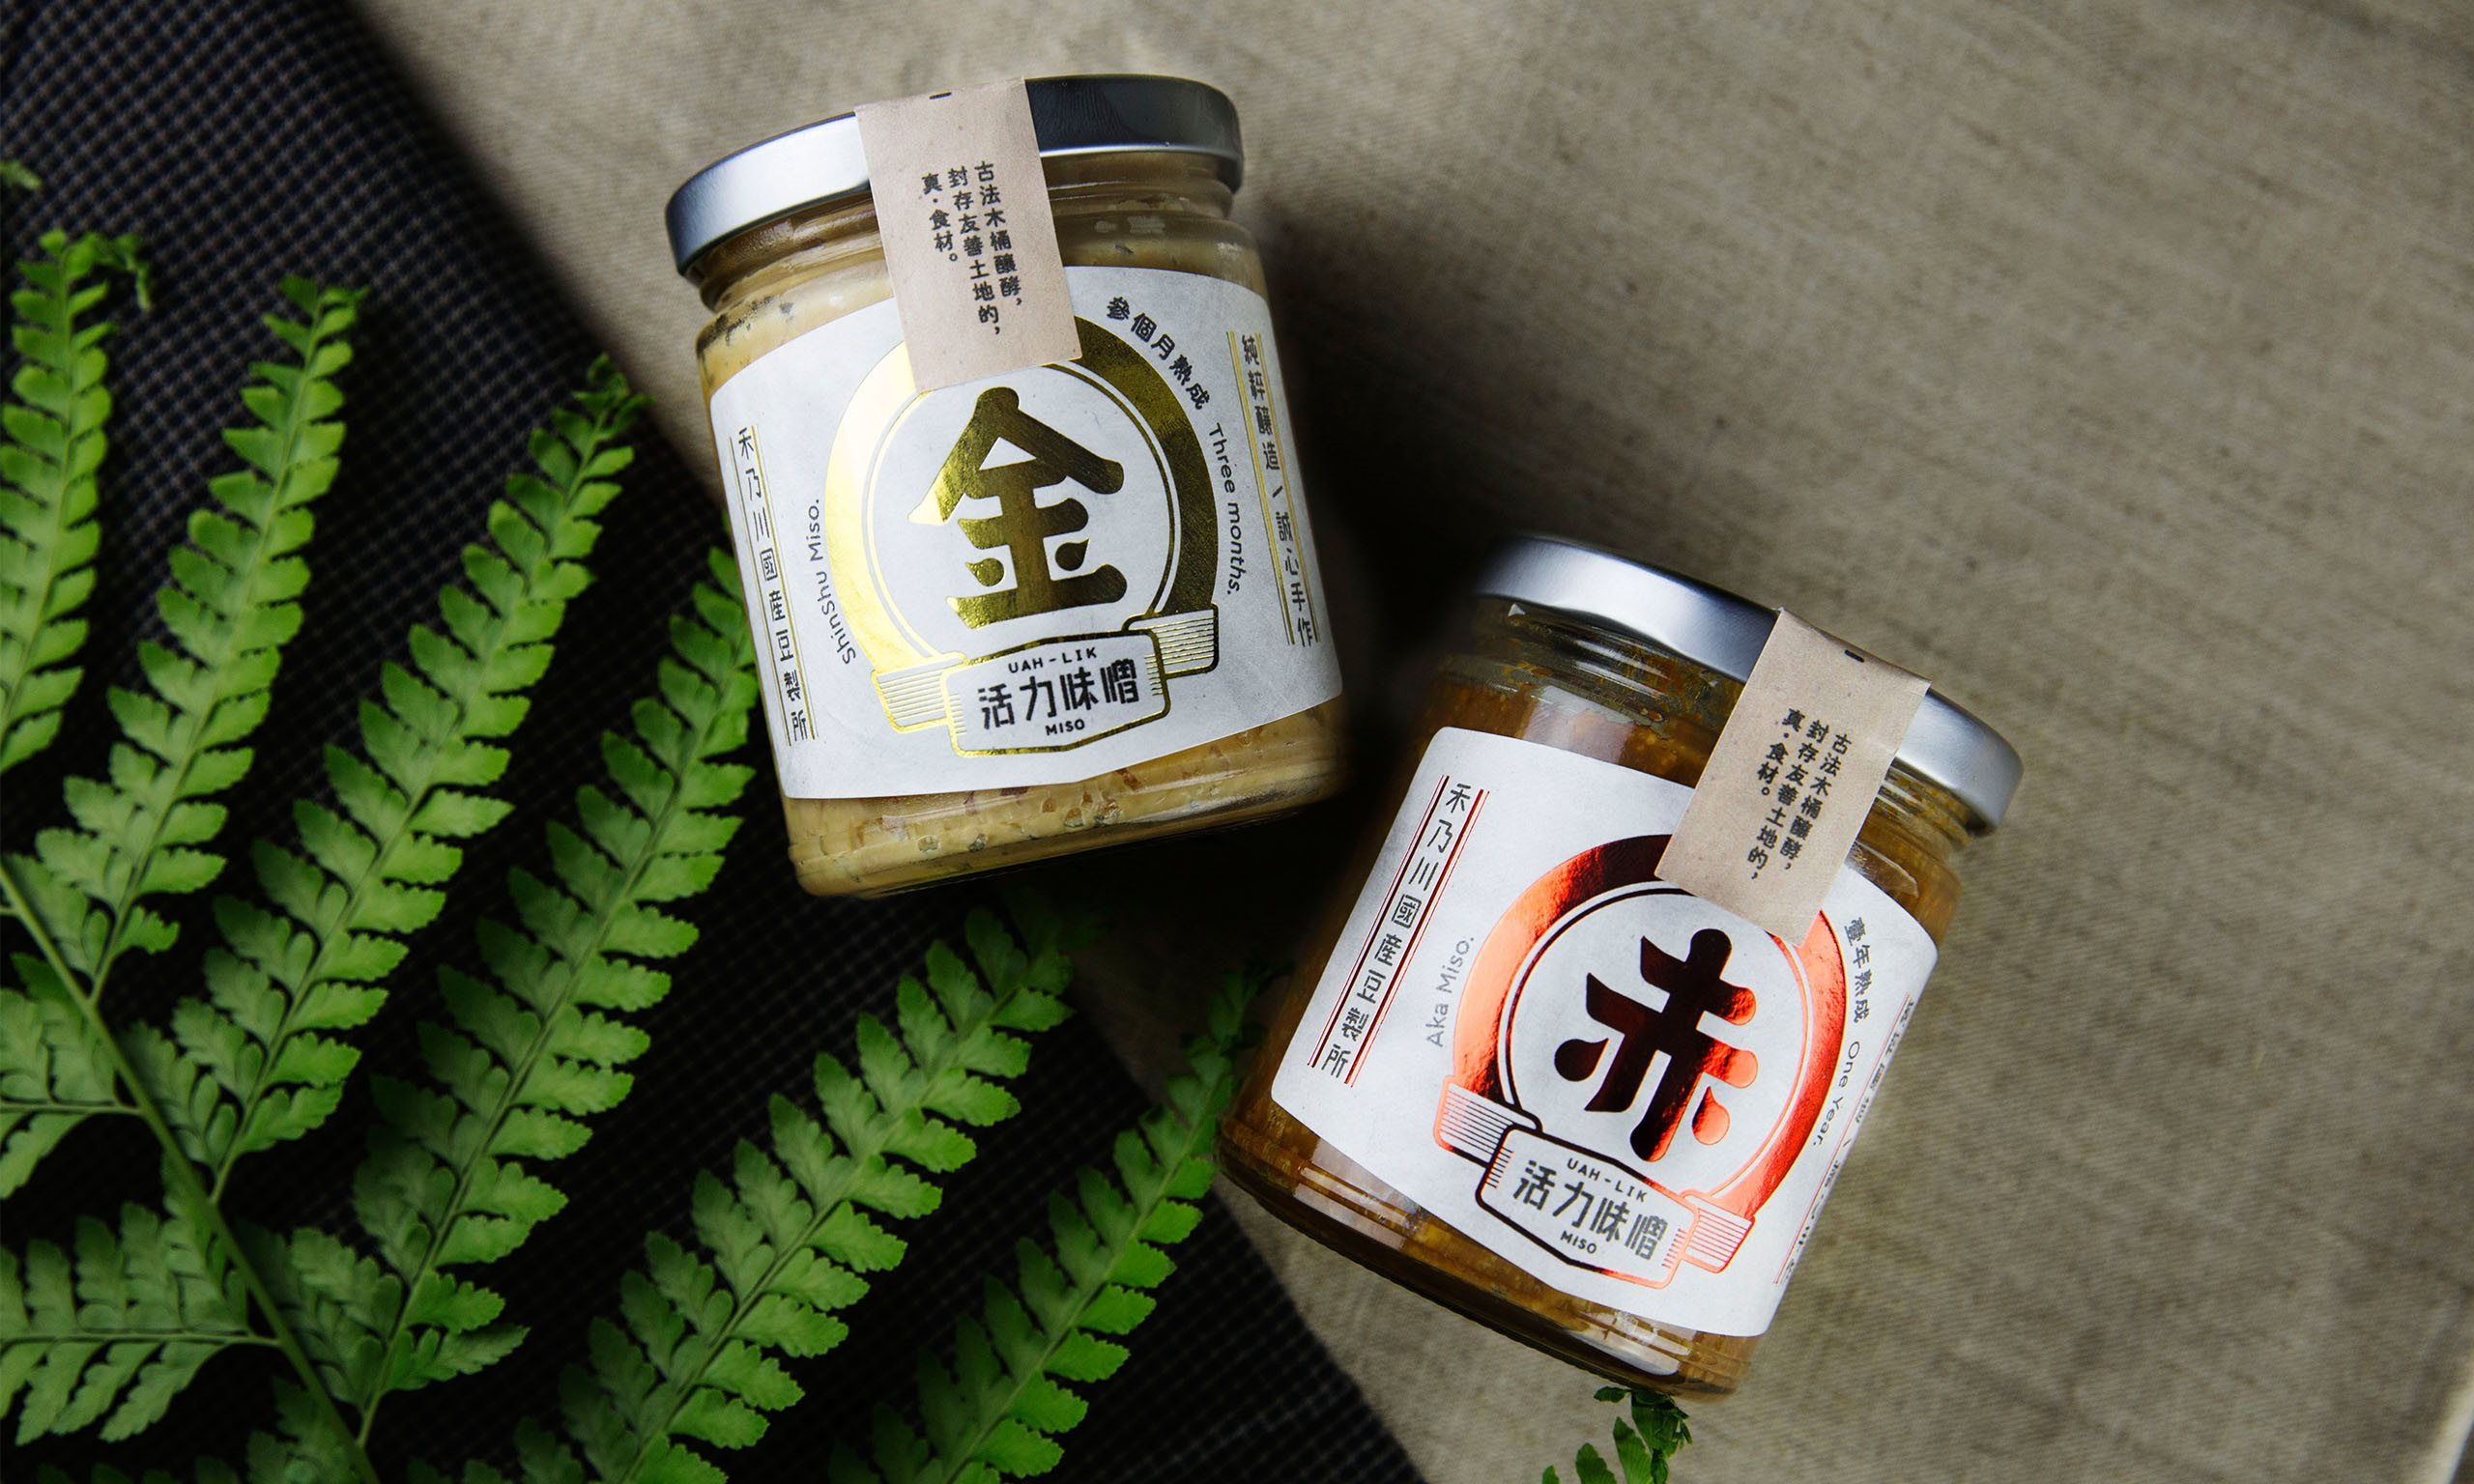 UAH-LIK Miso - Taiwan handmade natural Miso sauce with non-GMO soybeans